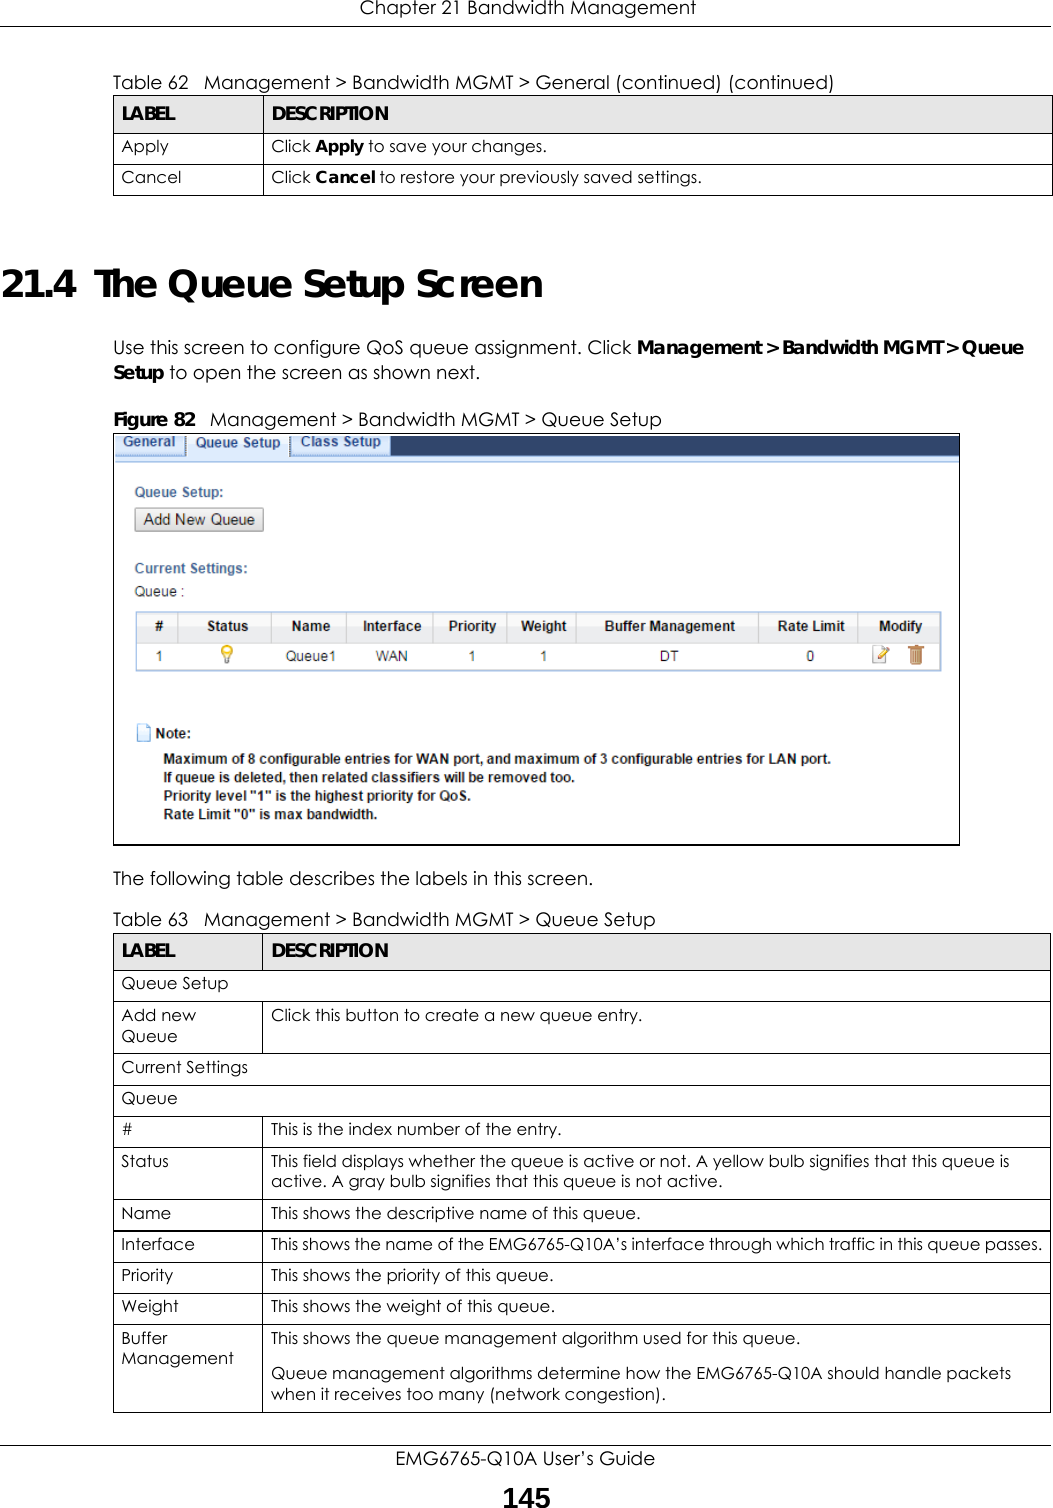  Chapter 21 Bandwidth ManagementEMG6765-Q10A User’s Guide14521.4  The Queue Setup ScreenUse this screen to configure QoS queue assignment. Click Management &gt; Bandwidth MGMT &gt; Queue Setup to open the screen as shown next. Figure 82   Management &gt; Bandwidth MGMT &gt; Queue SetupThe following table describes the labels in this screen. Apply Click Apply to save your changes.Cancel Click Cancel to restore your previously saved settings.Table 62   Management &gt; Bandwidth MGMT &gt; General (continued) (continued)LABEL DESCRIPTIONTable 63   Management &gt; Bandwidth MGMT &gt; Queue SetupLABEL DESCRIPTIONQueue SetupAdd new QueueClick this button to create a new queue entry.Current SettingsQueue#This is the index number of the entry.Status This field displays whether the queue is active or not. A yellow bulb signifies that this queue is active. A gray bulb signifies that this queue is not active.Name This shows the descriptive name of this queue.Interface This shows the name of the EMG6765-Q10A’s interface through which traffic in this queue passes.Priority This shows the priority of this queue.Weight This shows the weight of this queue.Buffer Management This shows the queue management algorithm used for this queue.Queue management algorithms determine how the EMG6765-Q10A should handle packets when it receives too many (network congestion). 